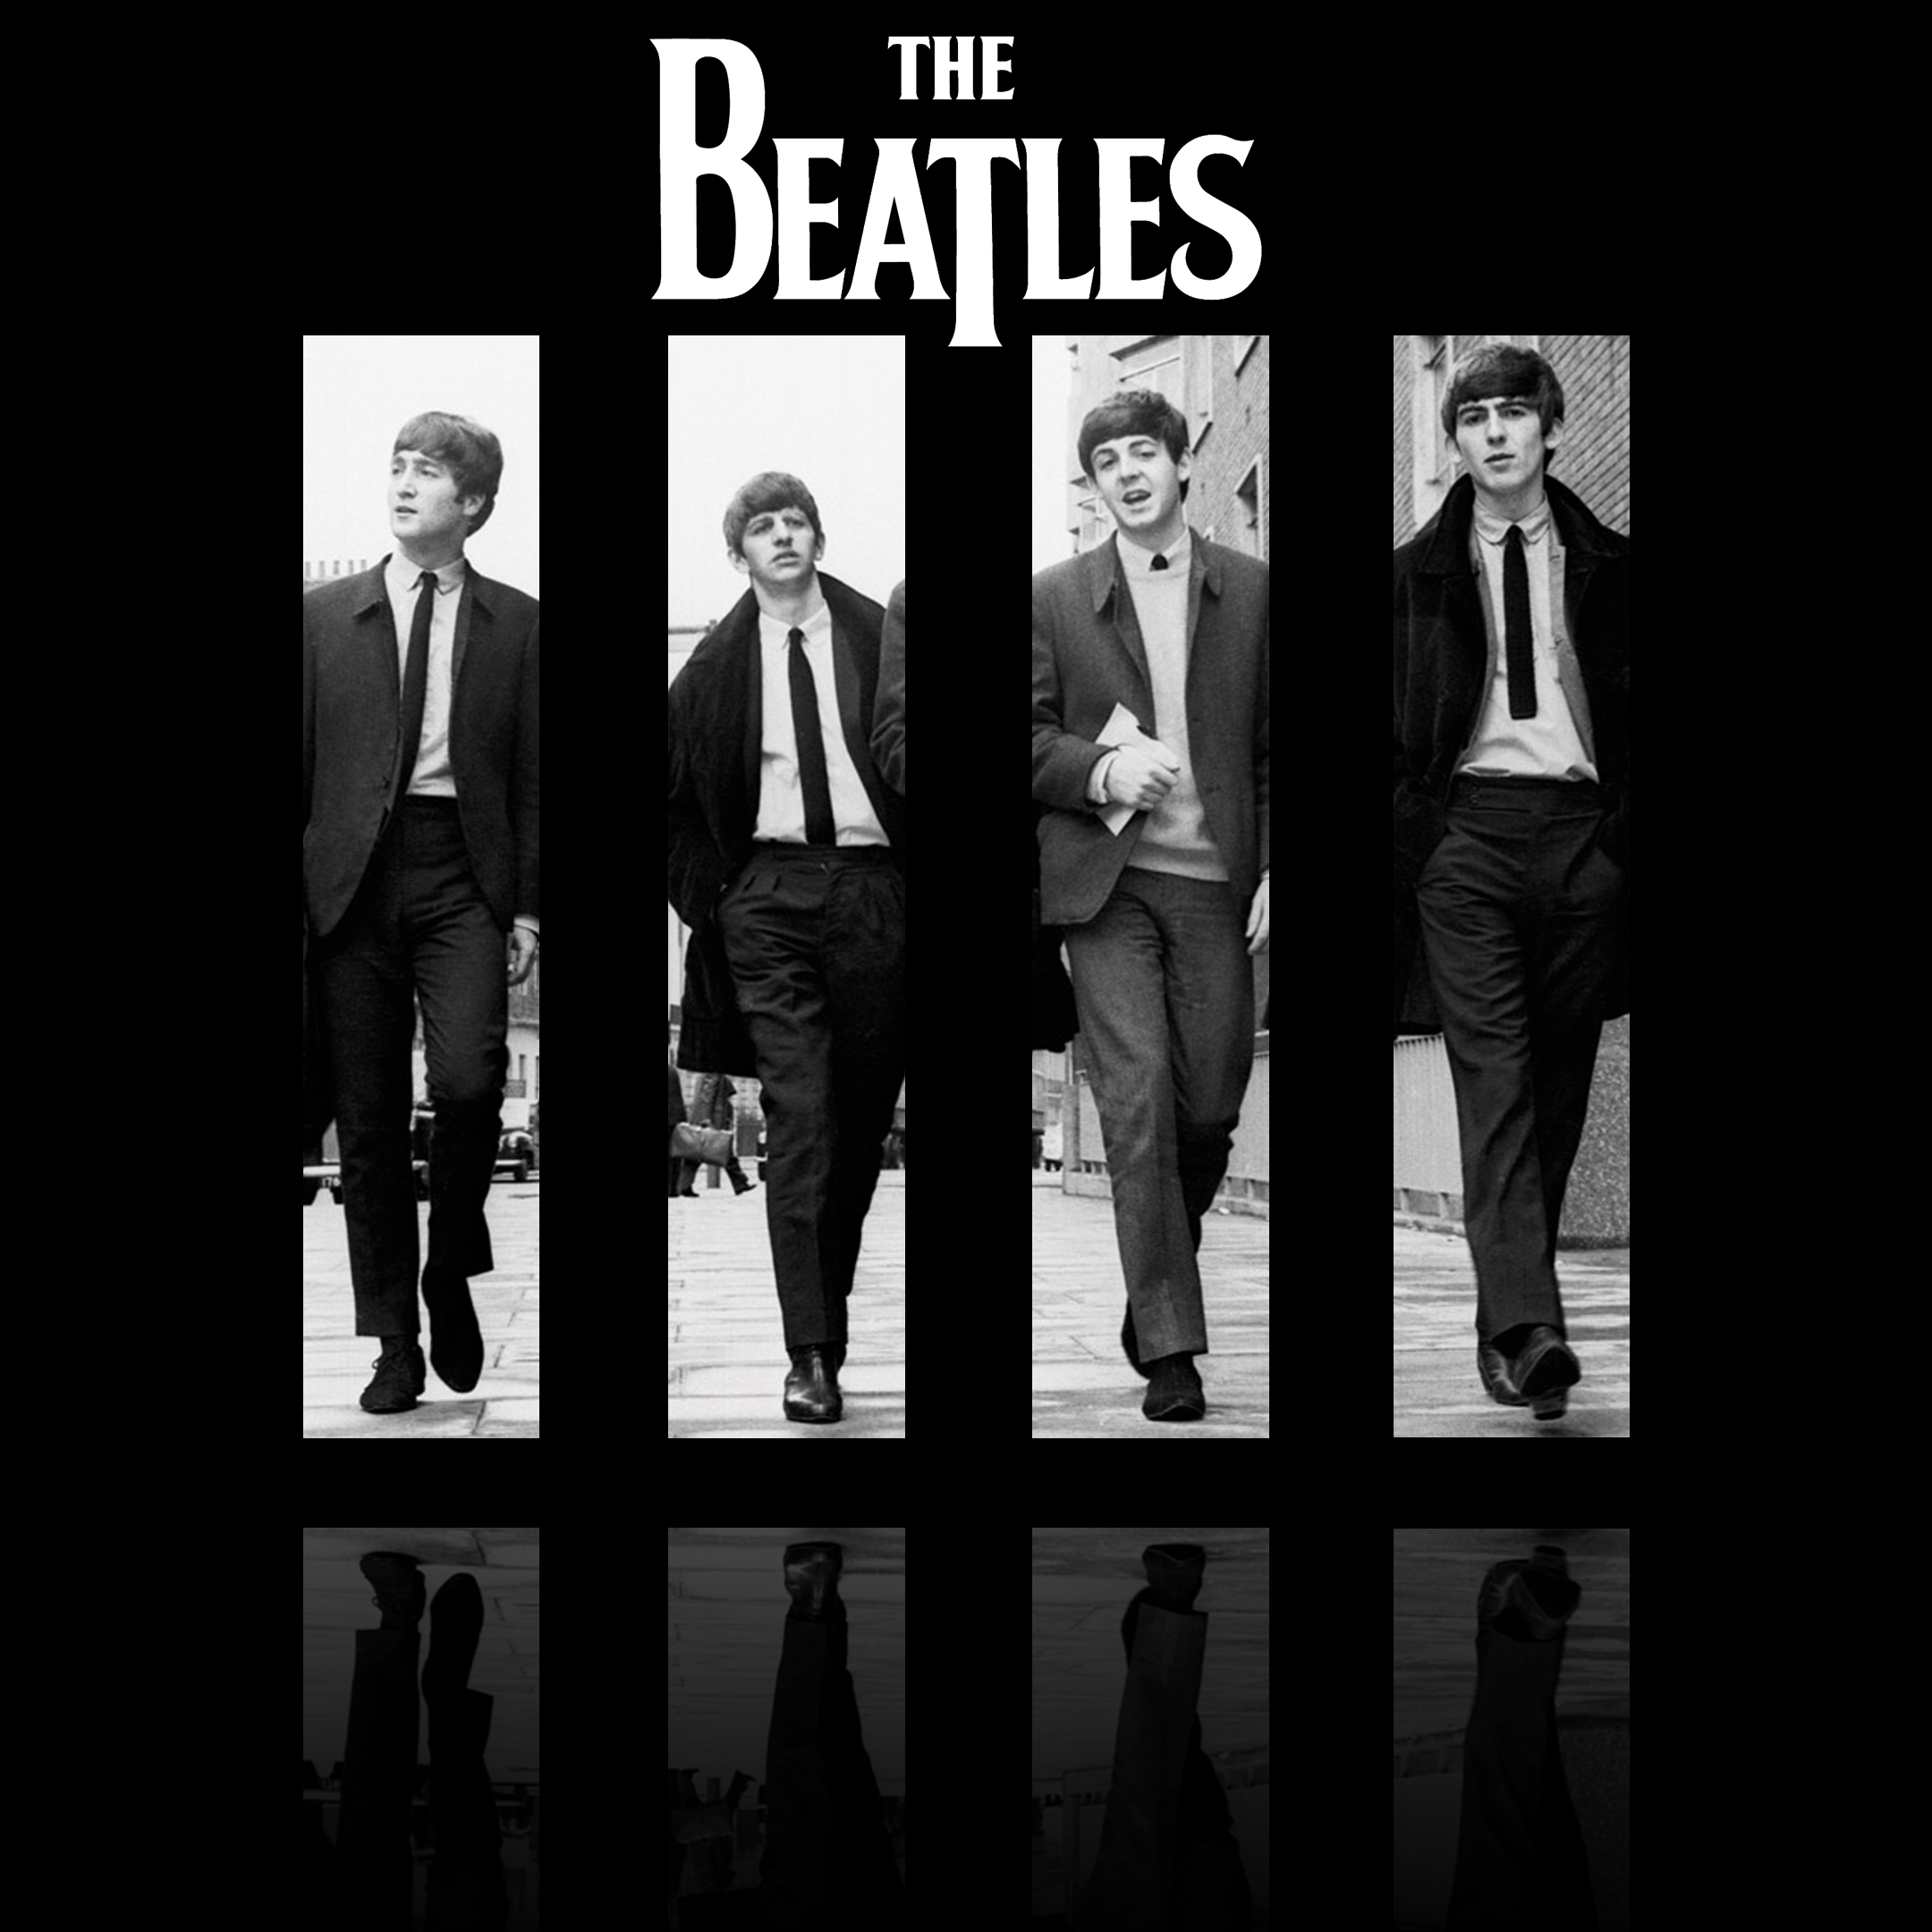 Pictures Of Music Legends The Beatles – The WoW Style2160 x 2160